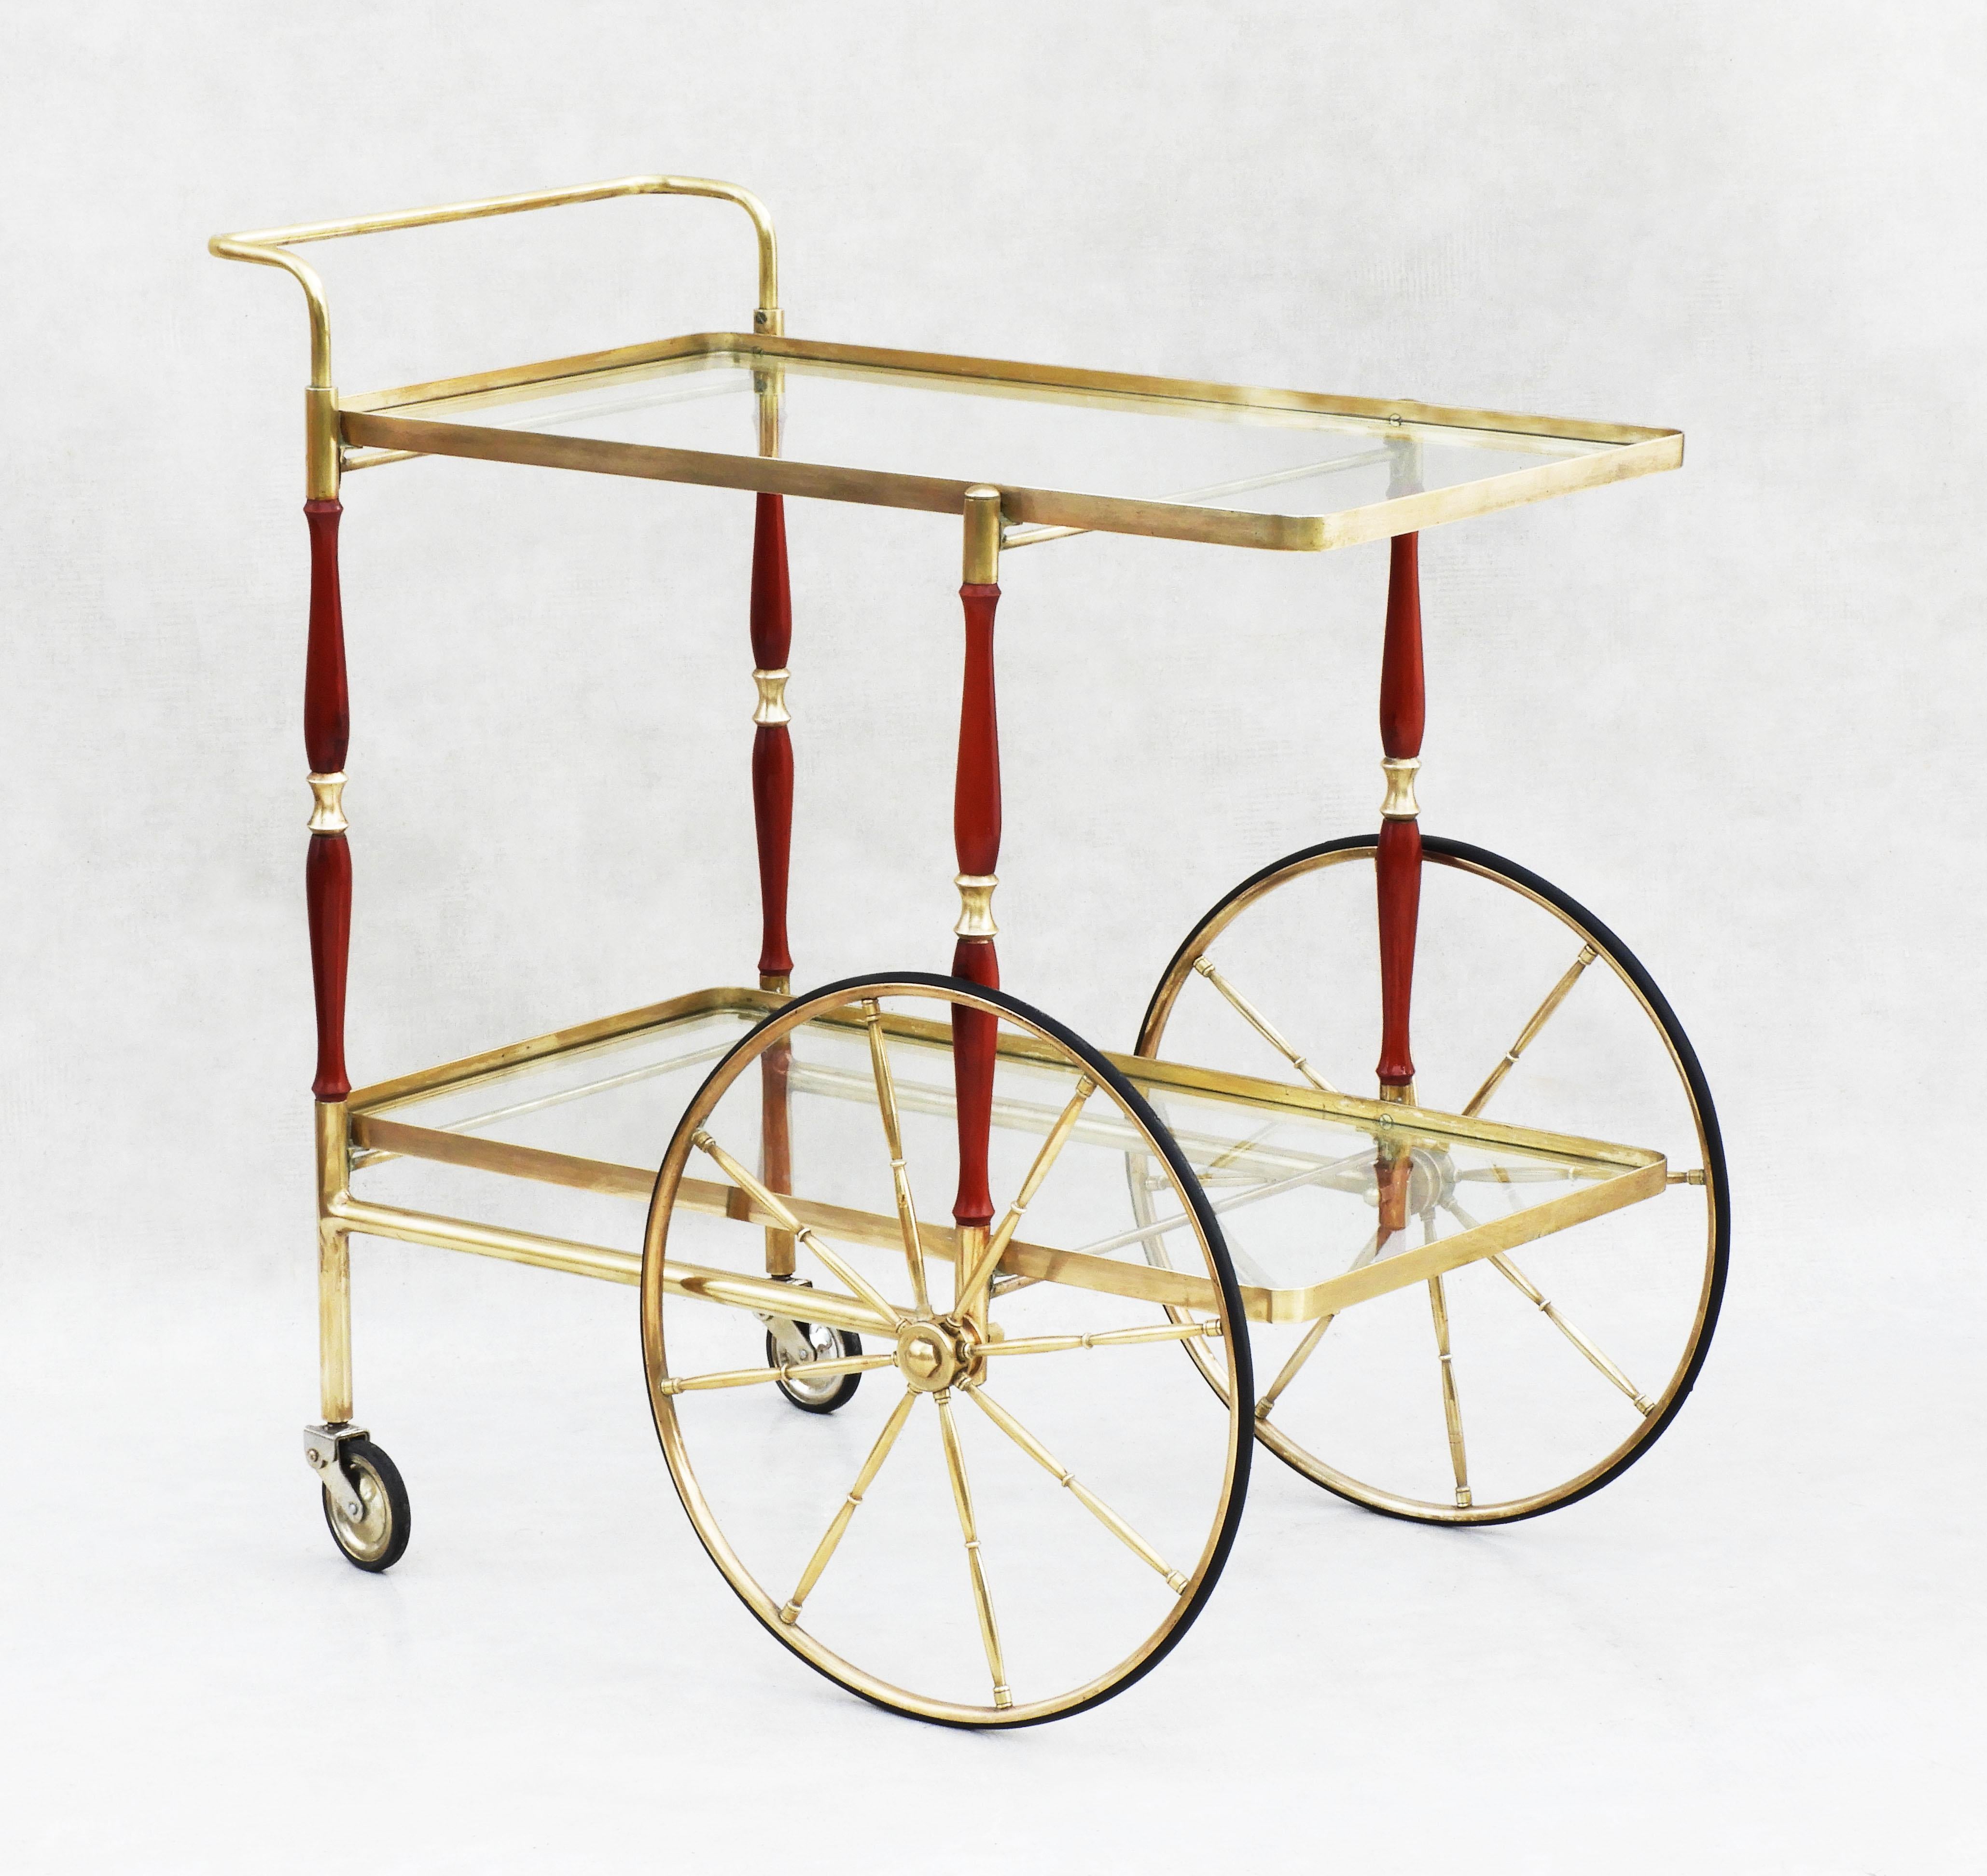 Vintage Mid Century Bar Cart c1950s Italy.  A stylish and practical, two-tiered, drinks trolley, bar cart or cocktail table with a brass frame and glass shelving, red wood detailing and oversized brass spoked wheels.  A nicely proportioned rolling